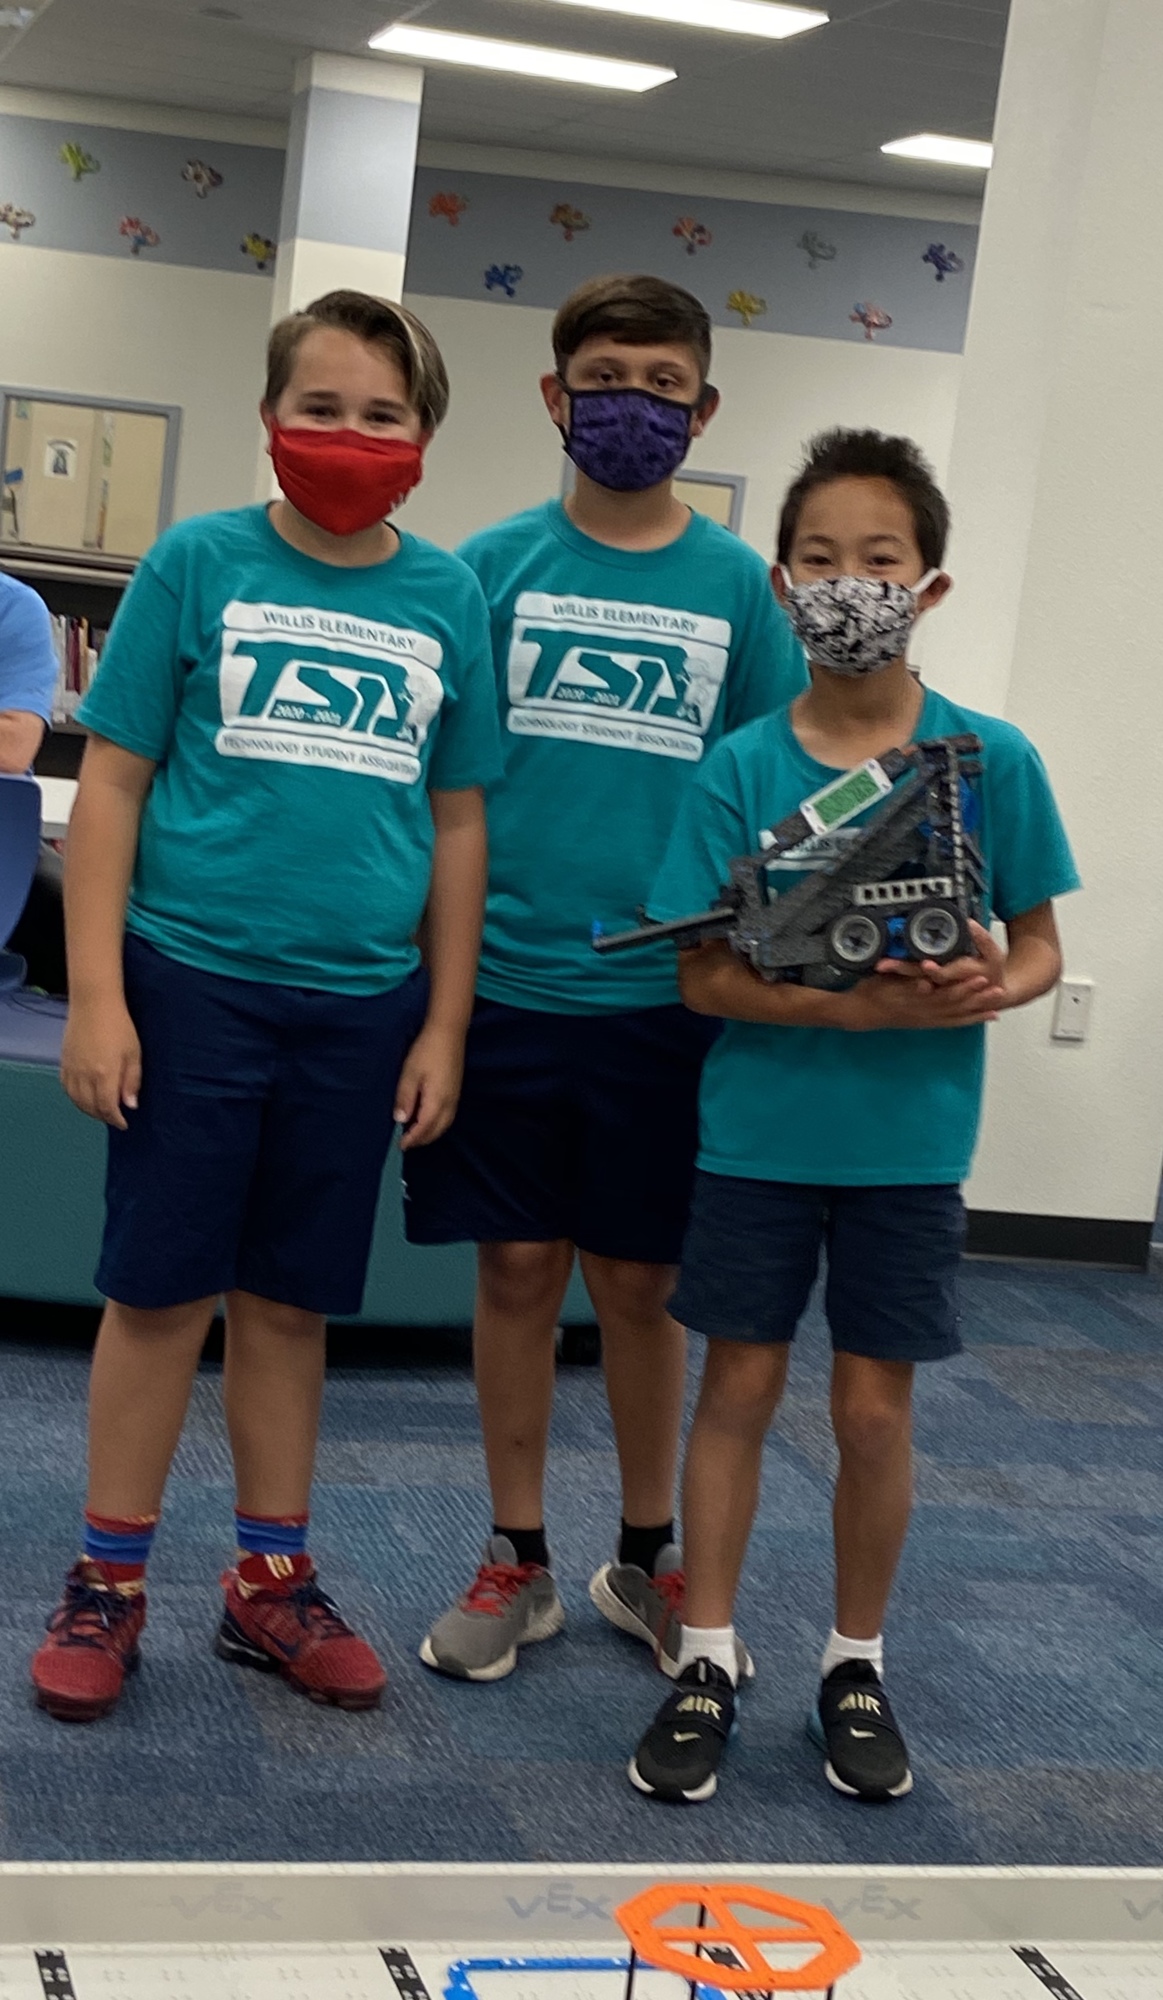 Logan Scheuerman, Jack Carlson and Magnus Tilton, who are fifth graders at Robert E. Willis Elementary School, are part of the Gray Geckos VEX team. The millage helps support programs like the VEX program. Courtesy photo.